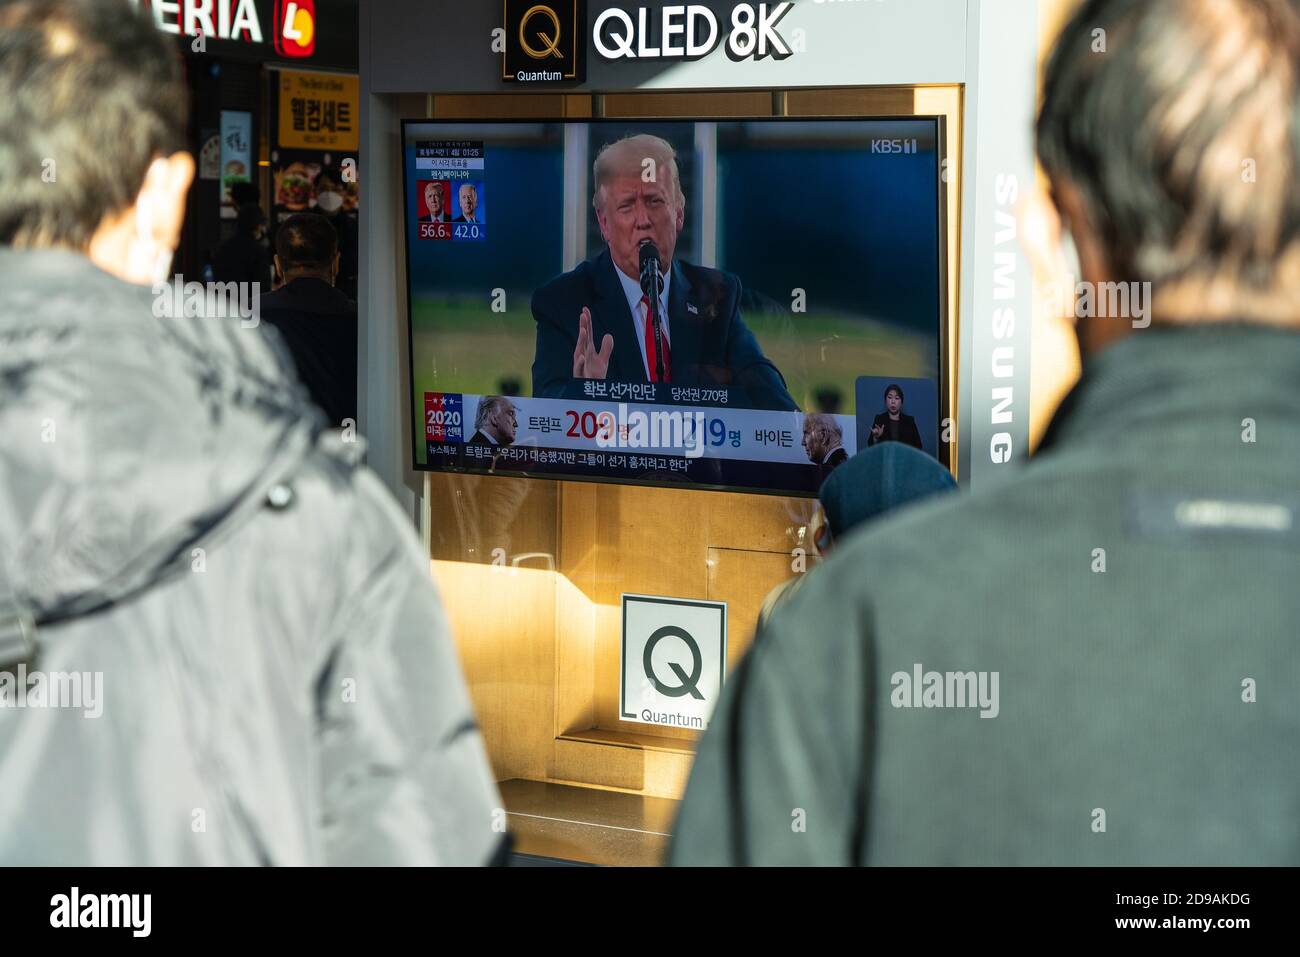 People at Seoul Train Station watch presidential candidate, Donald Trump on TV news report during the US Presidential election on 2020 US presidential election day. Stock Photo